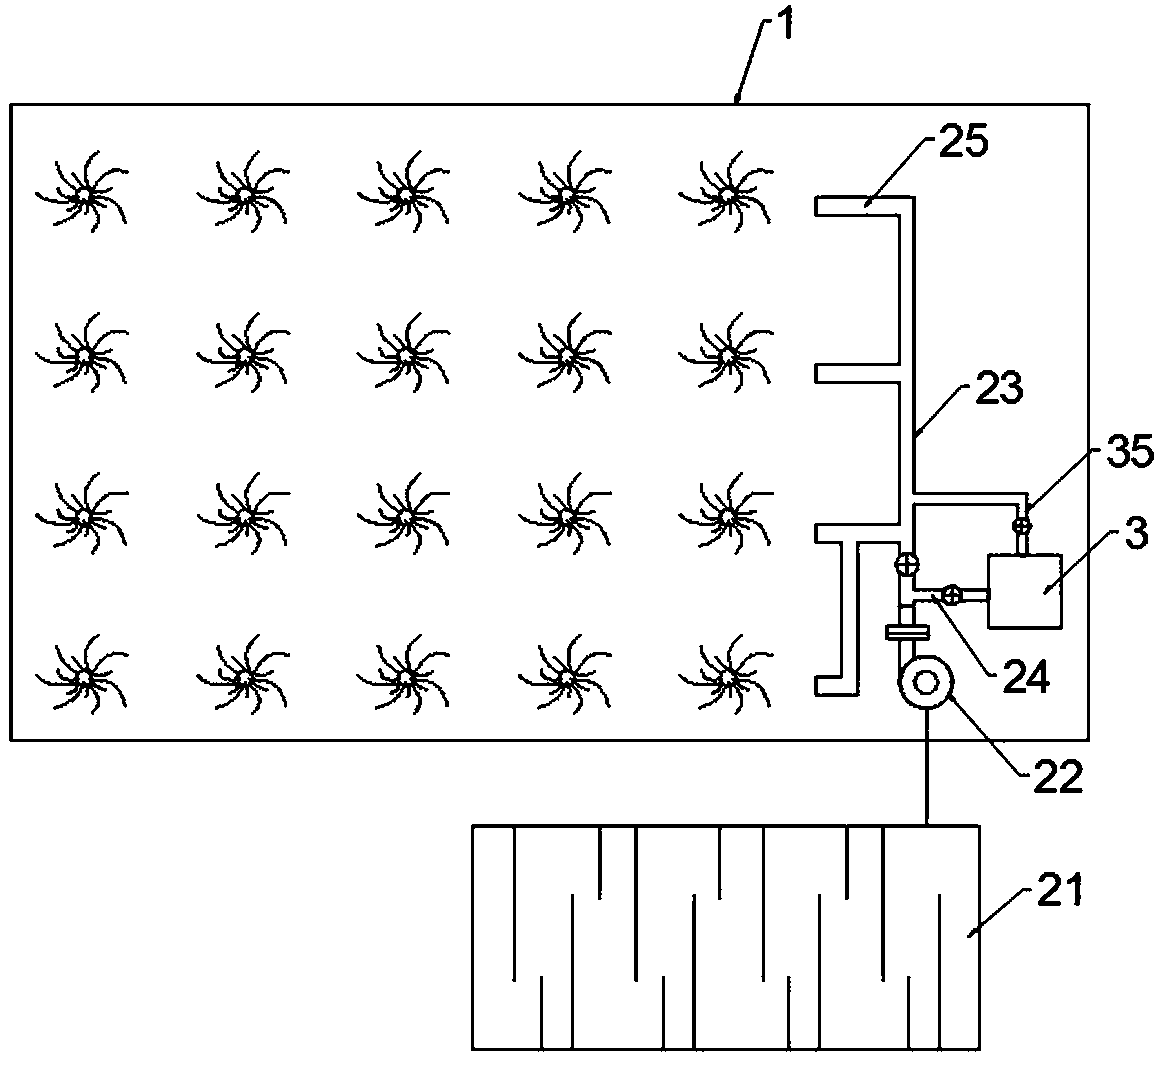 Carpet type water and fertilizer integrated irrigation system and method